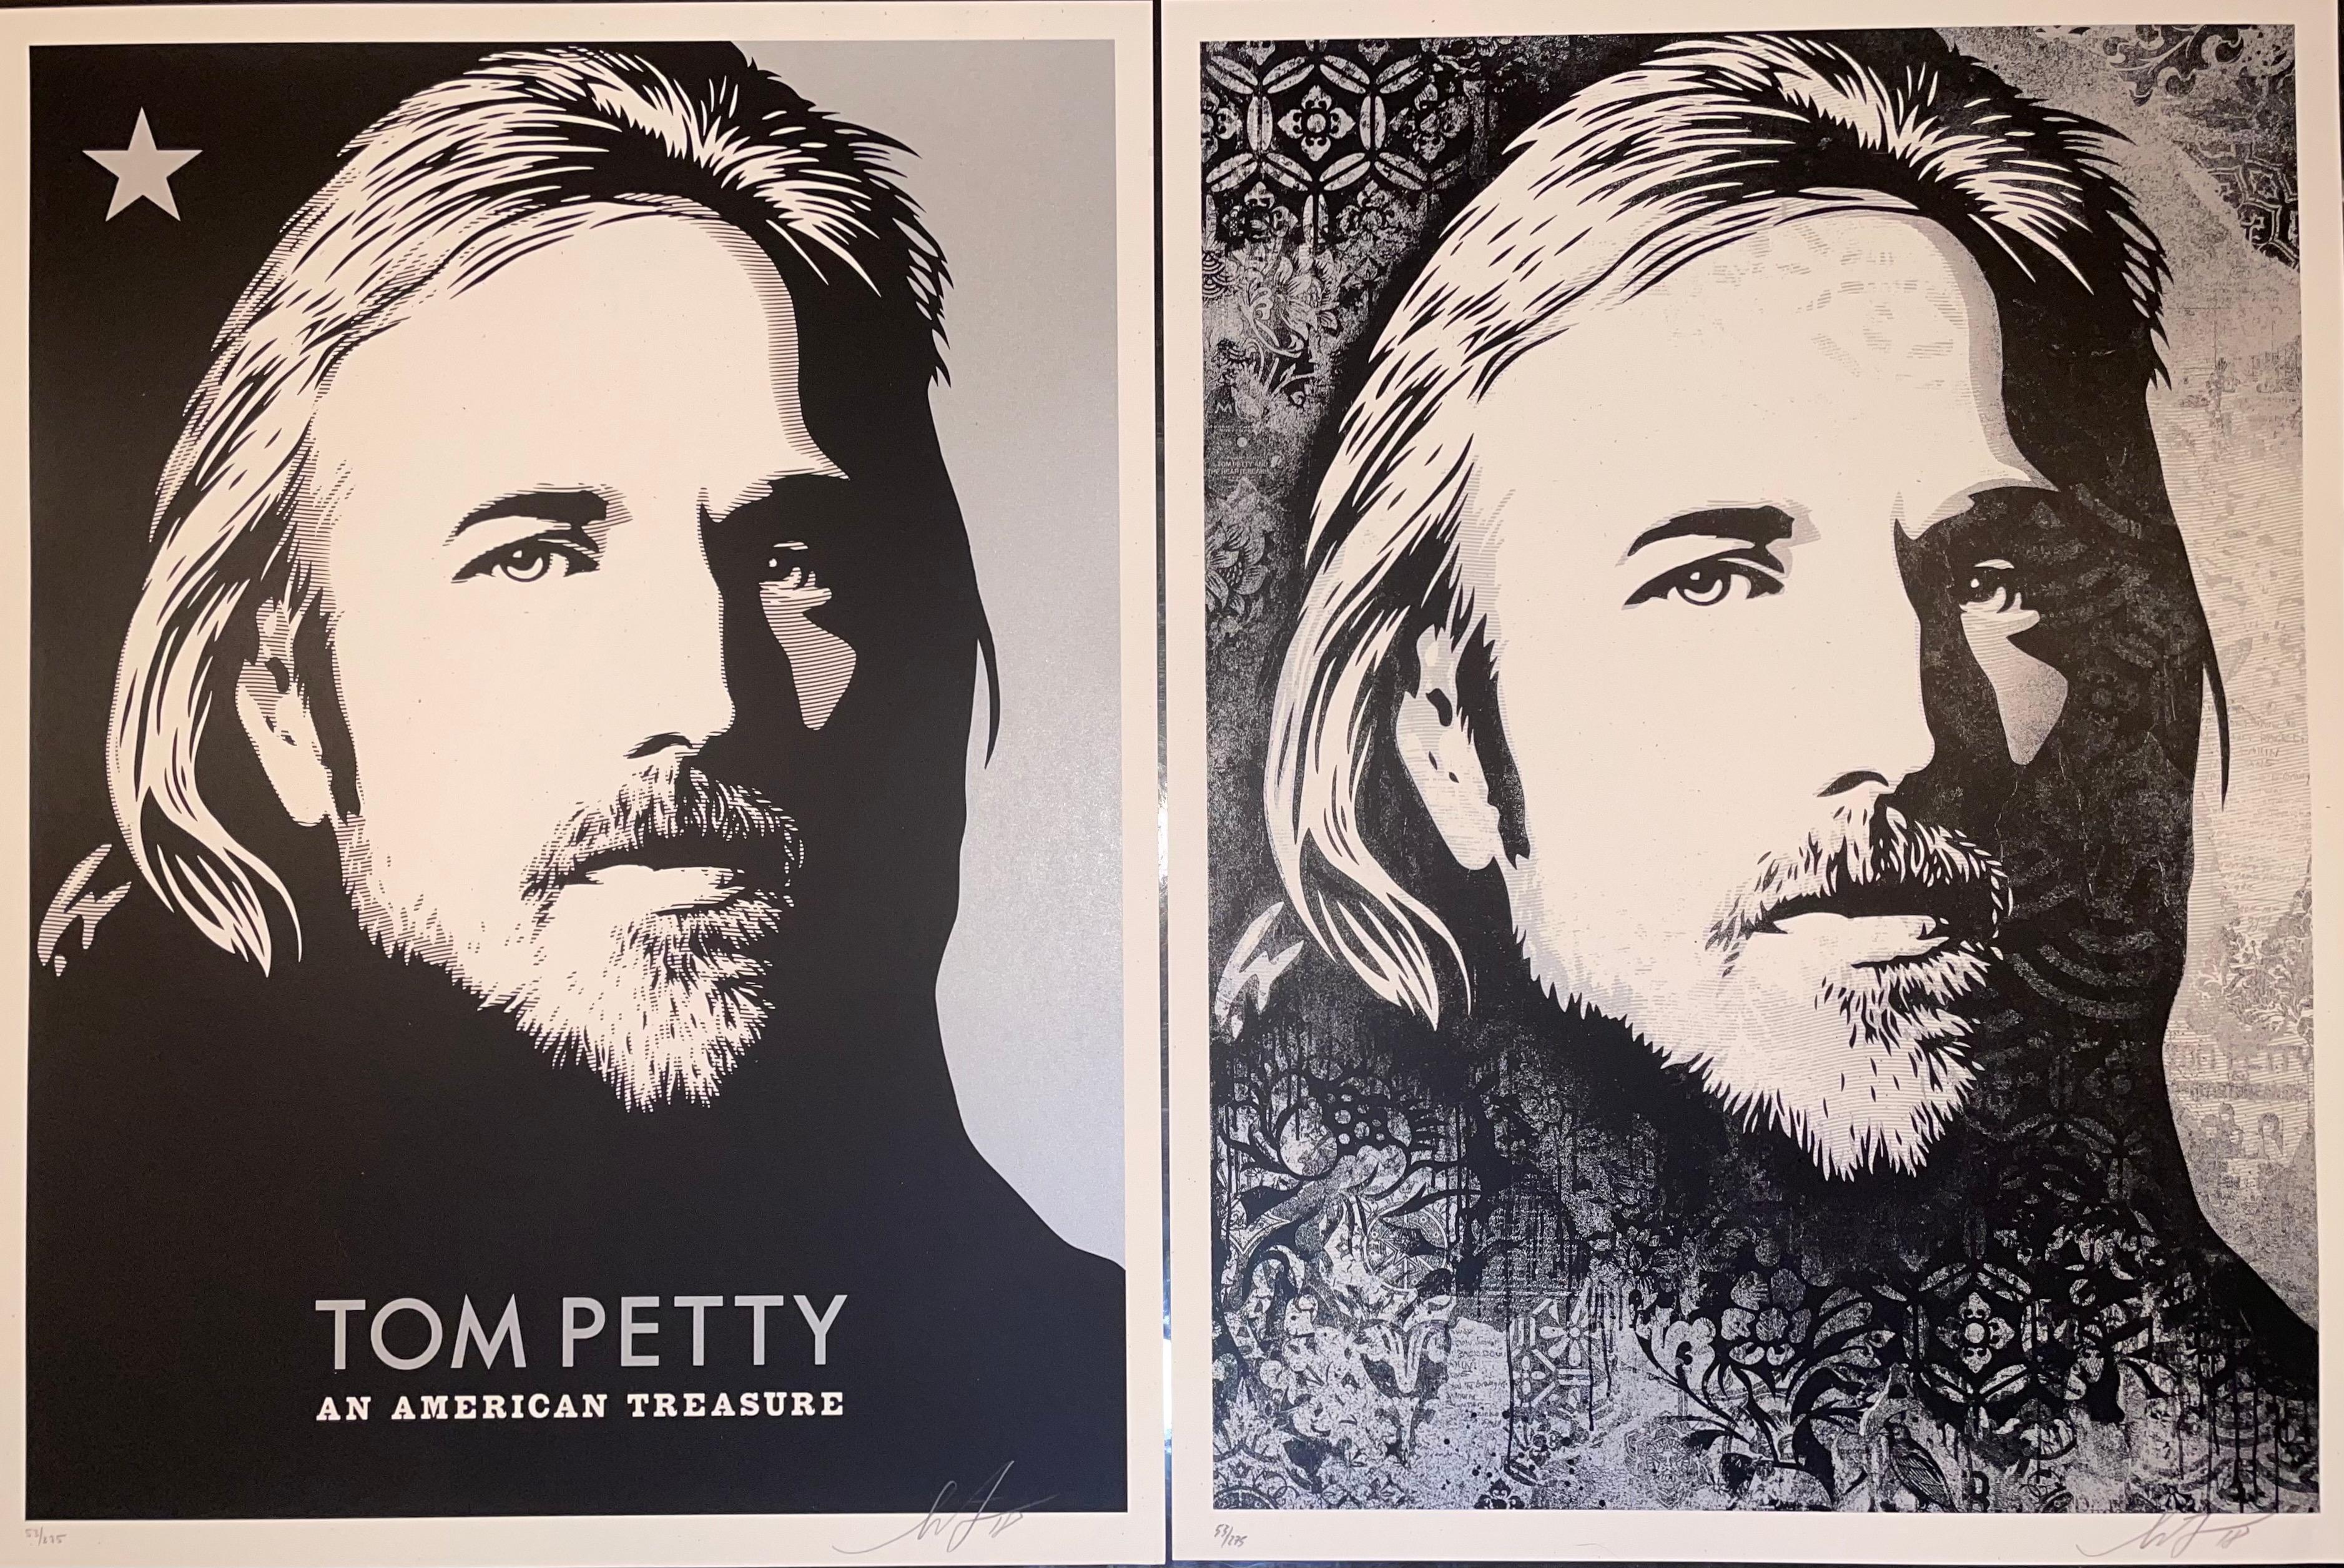 Shepard Fairey Print - Tom Petty "An American Treasure" Diptych Matching Numbered Set Contemporary Art